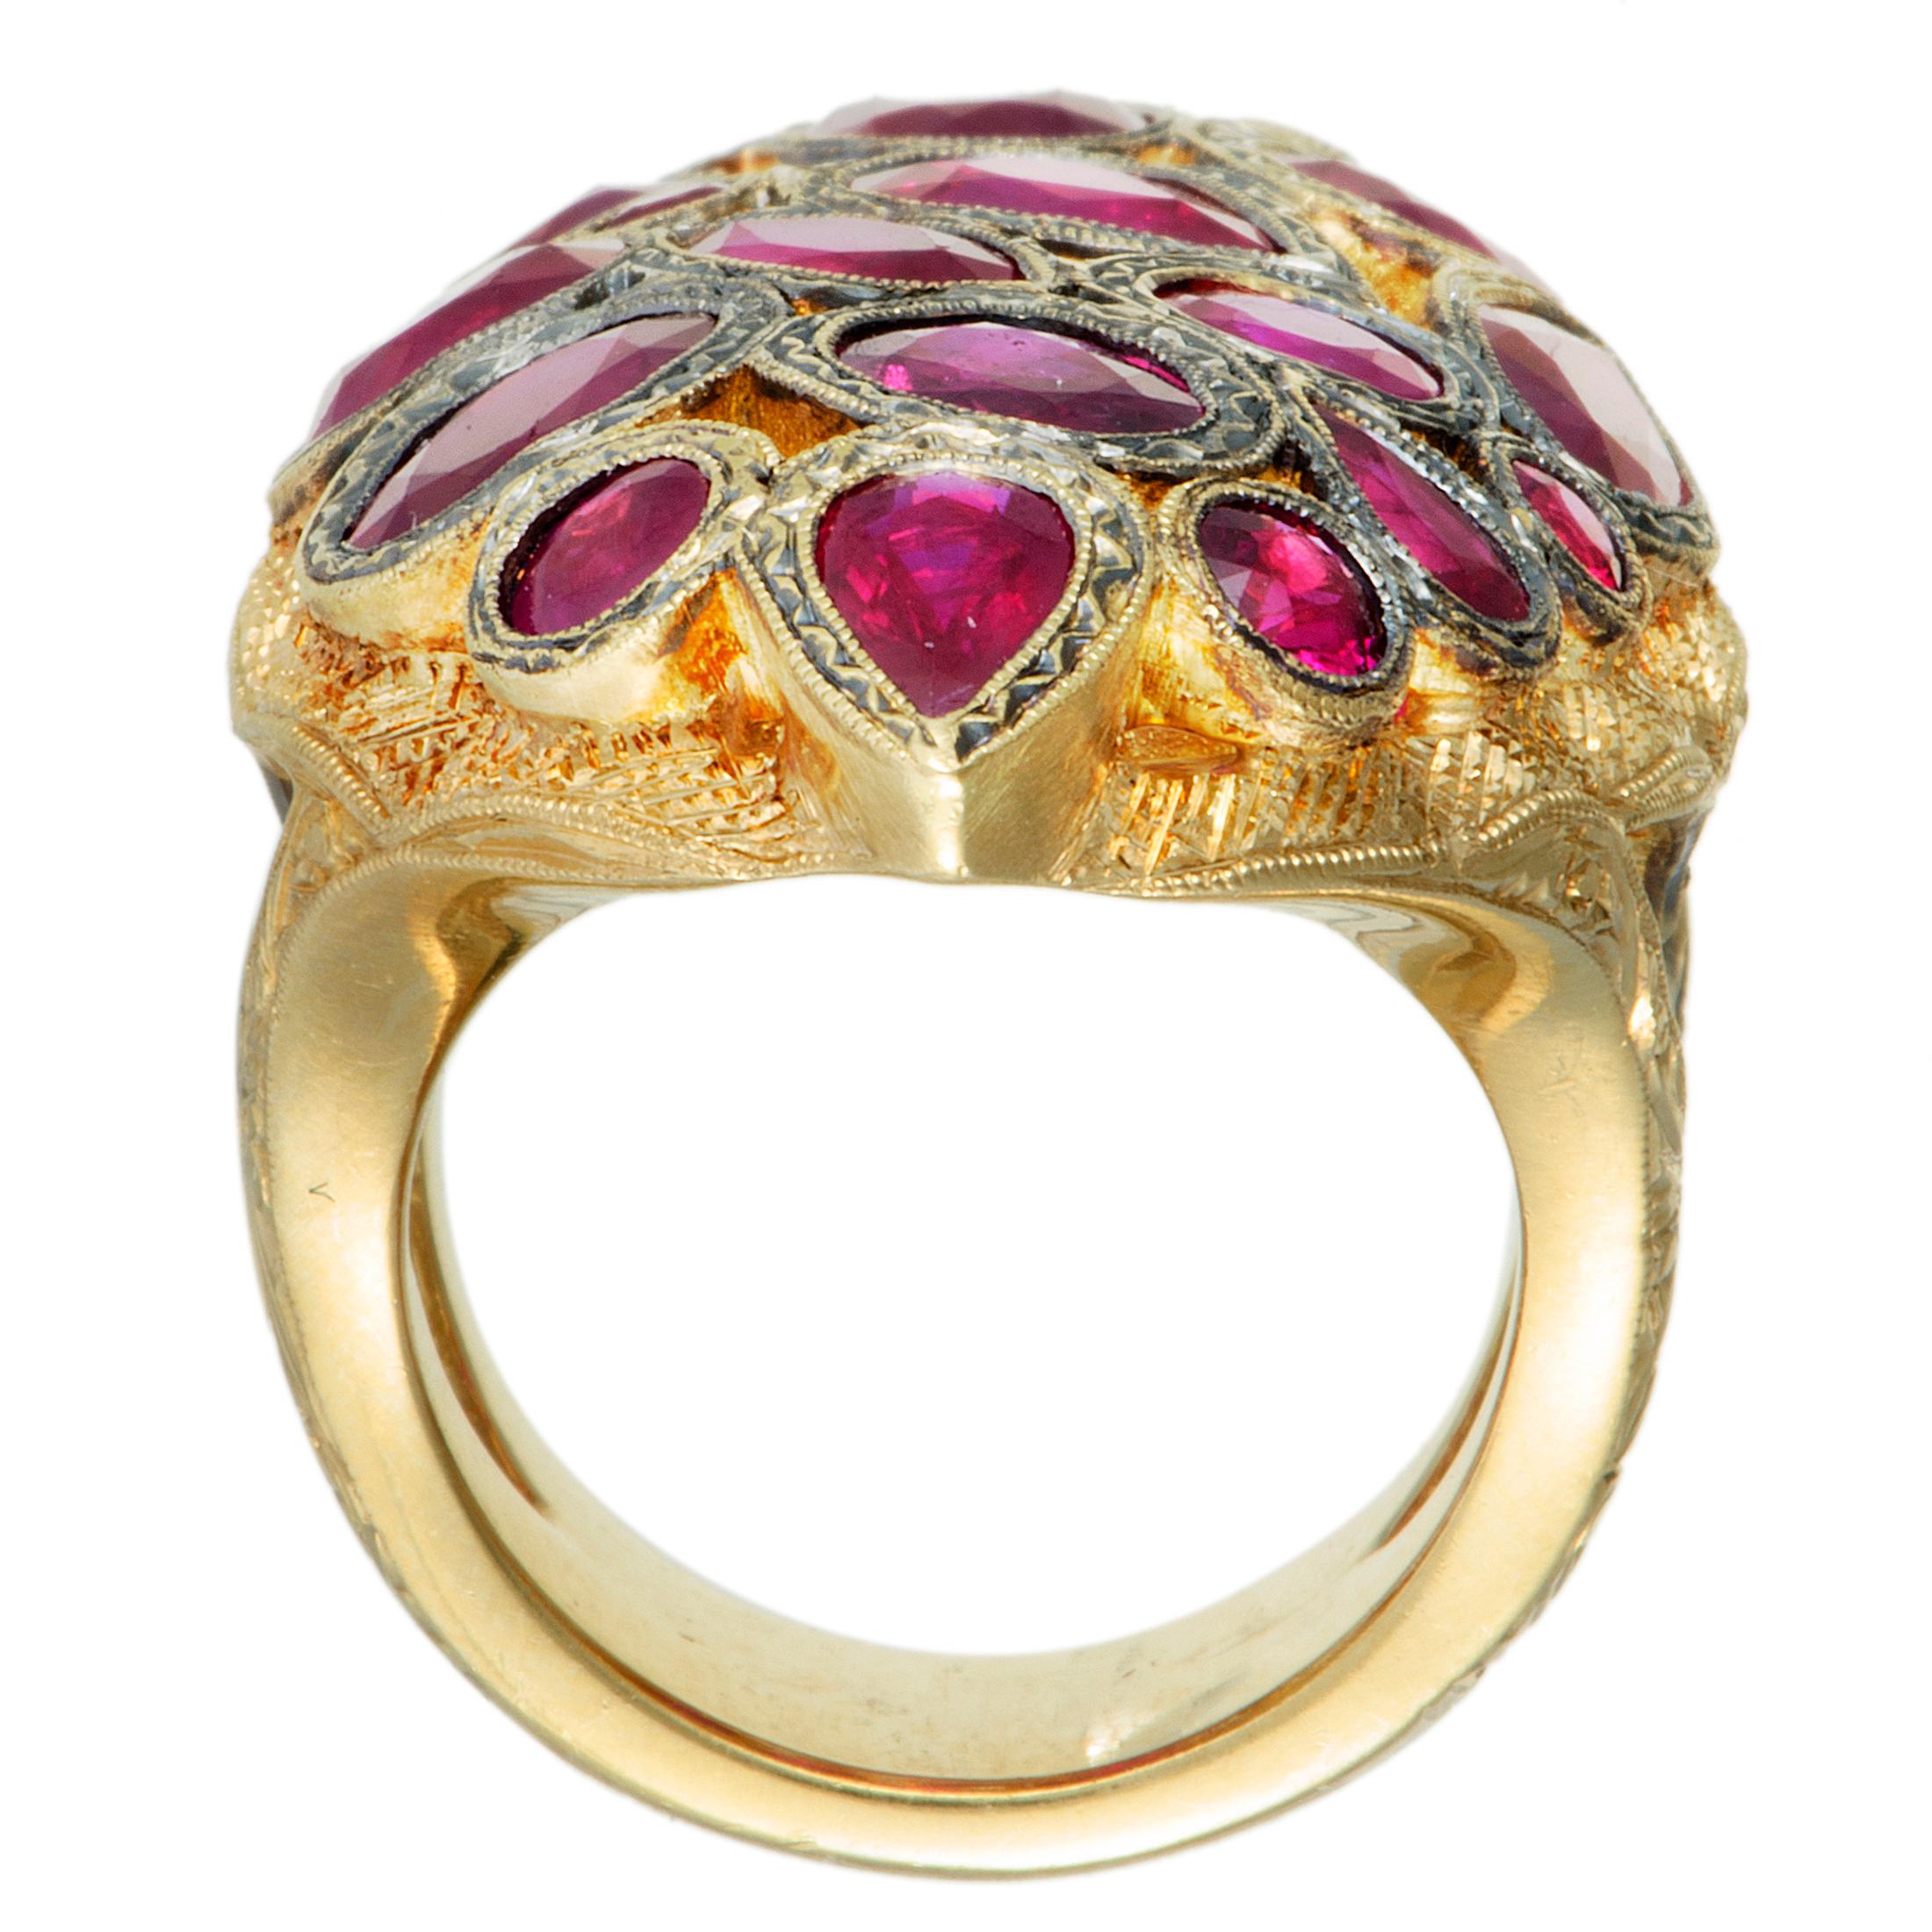 Embracing the renowned design values that are prominent in Loree Rodkin’s pieces, this extraordinary ring compels with its attractively offbeat style and fashionable gemstone décor. The ring is expertly crafted from 18K yellow gold and it is